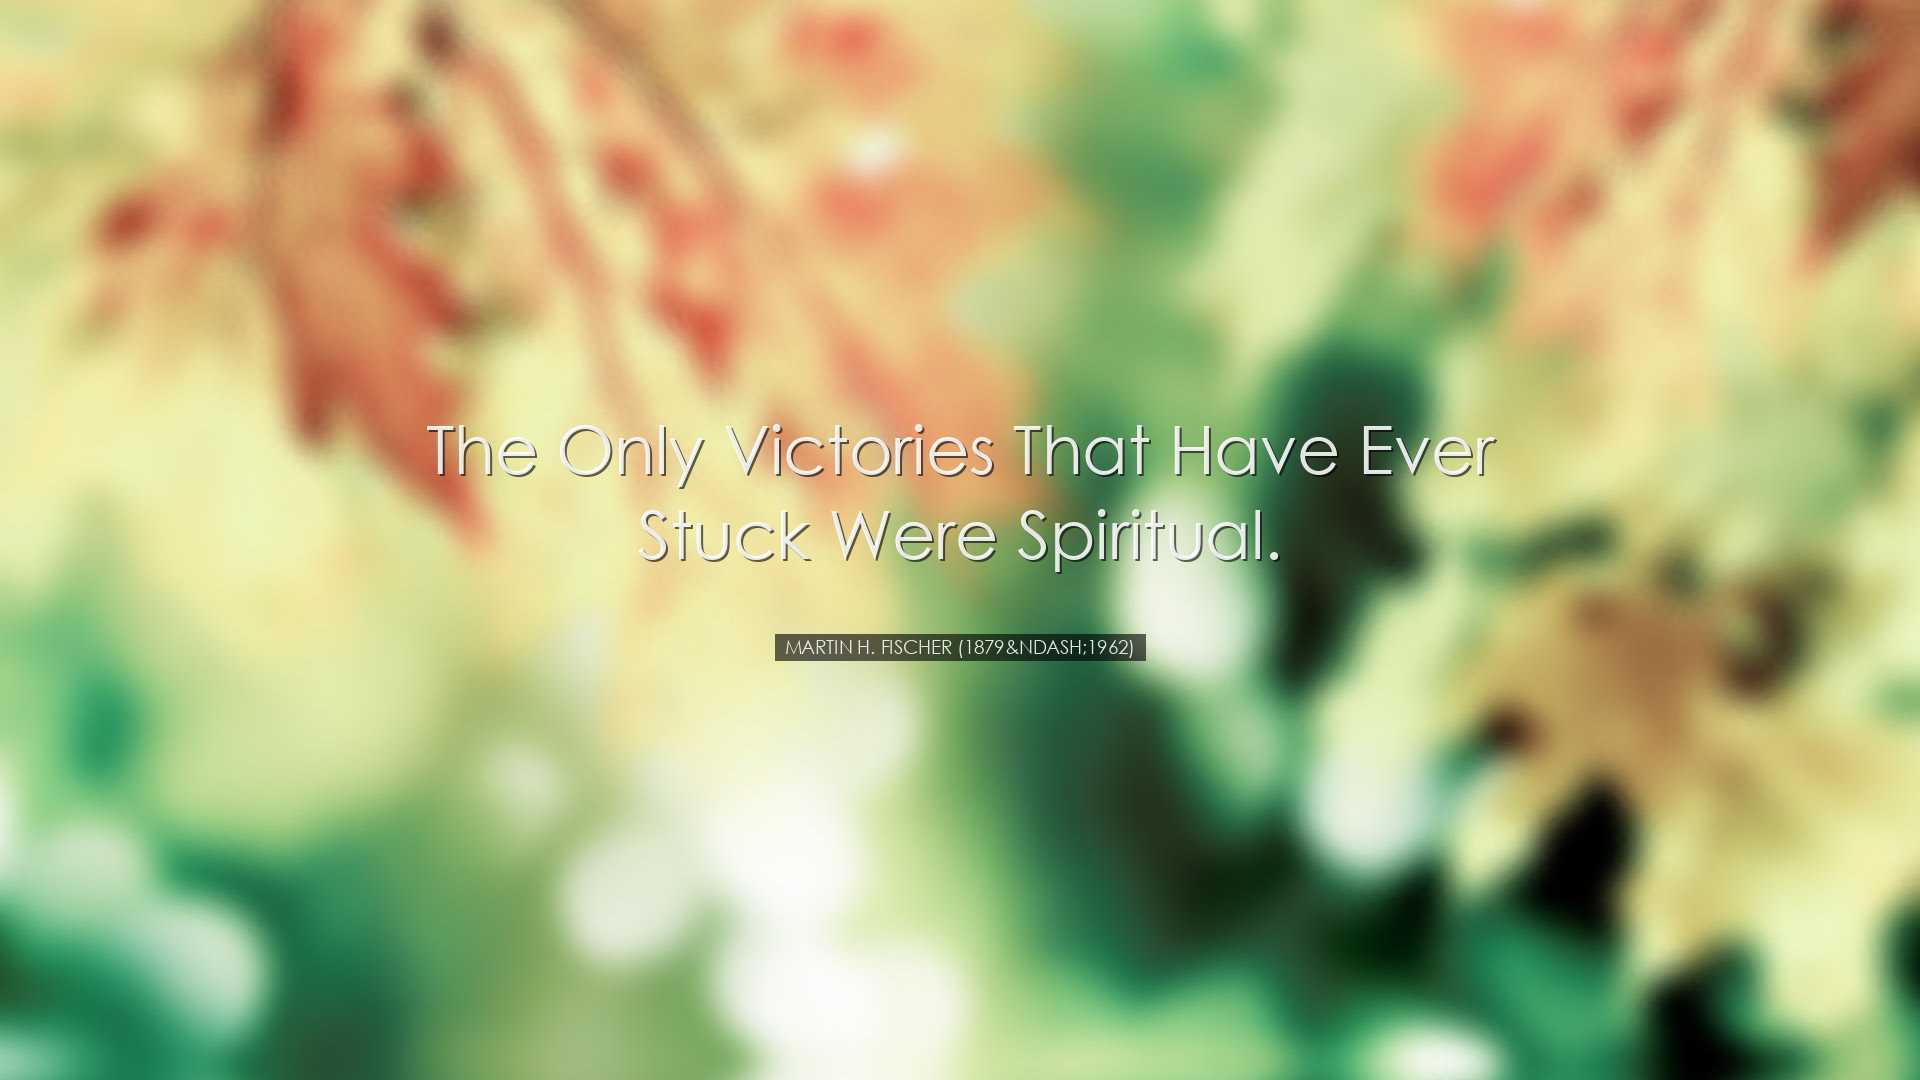 The only victories that have ever stuck were spiritual. - Martin H